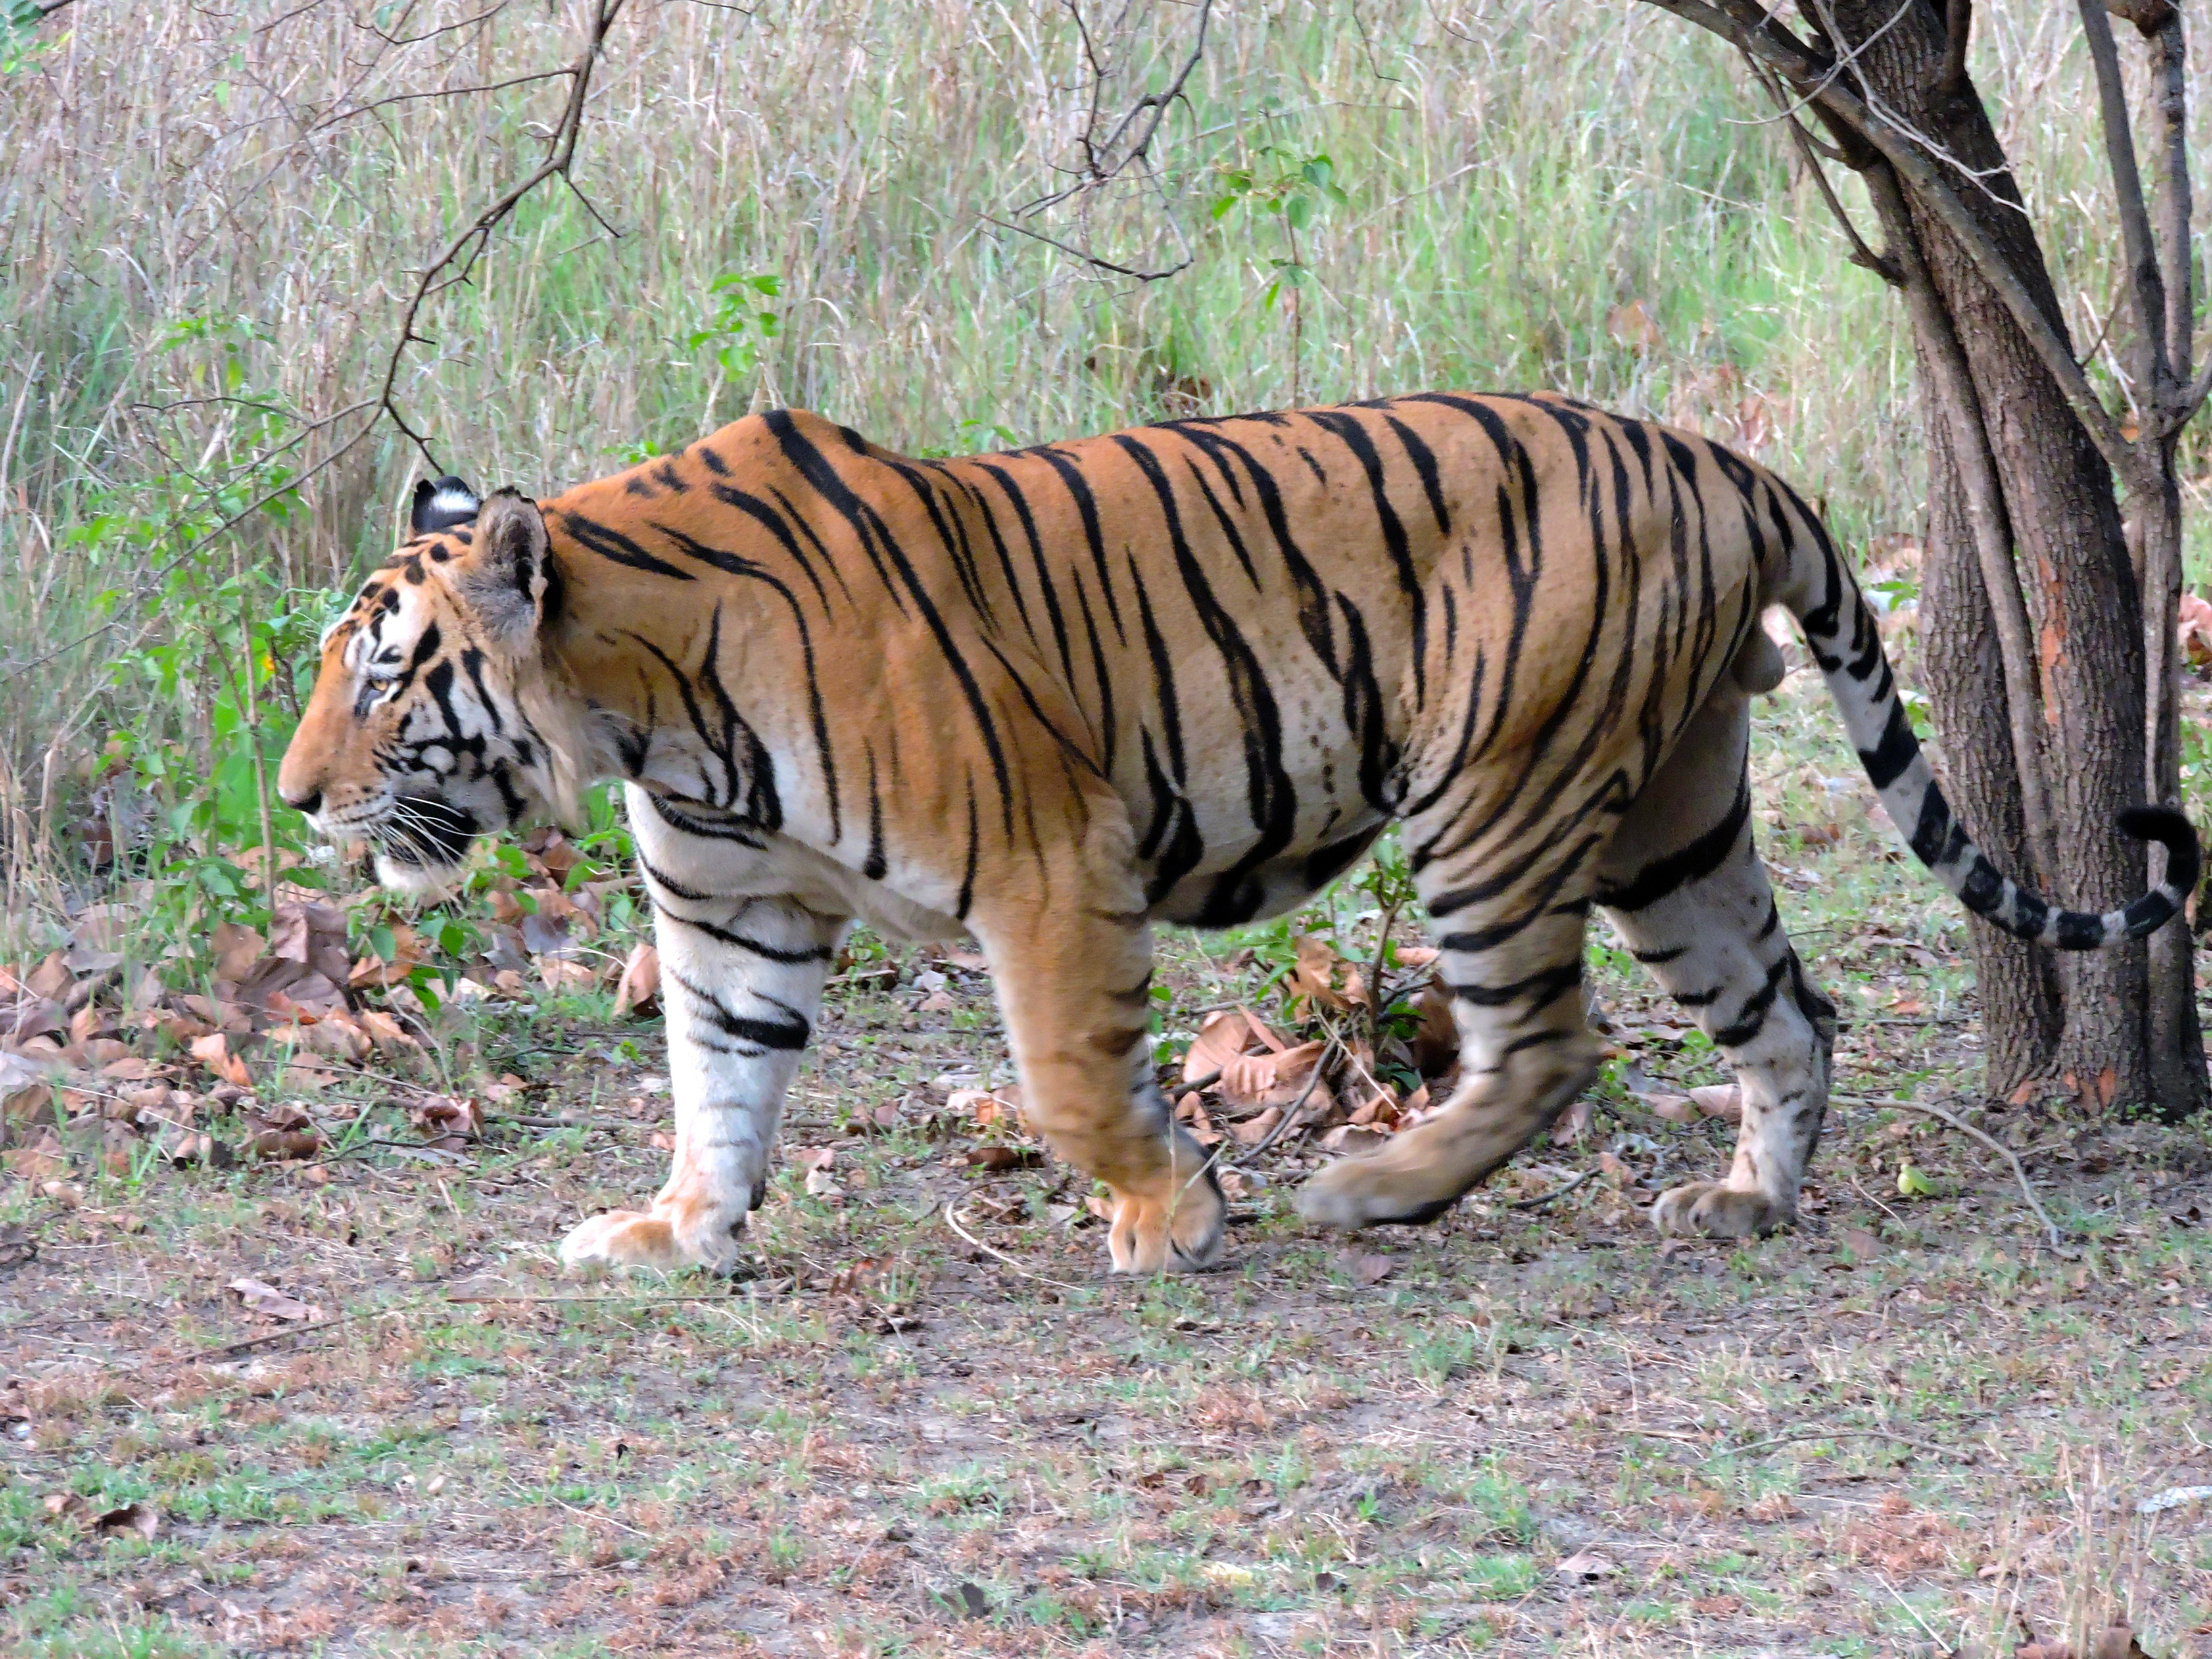 When was the Bengal tiger first discovered?